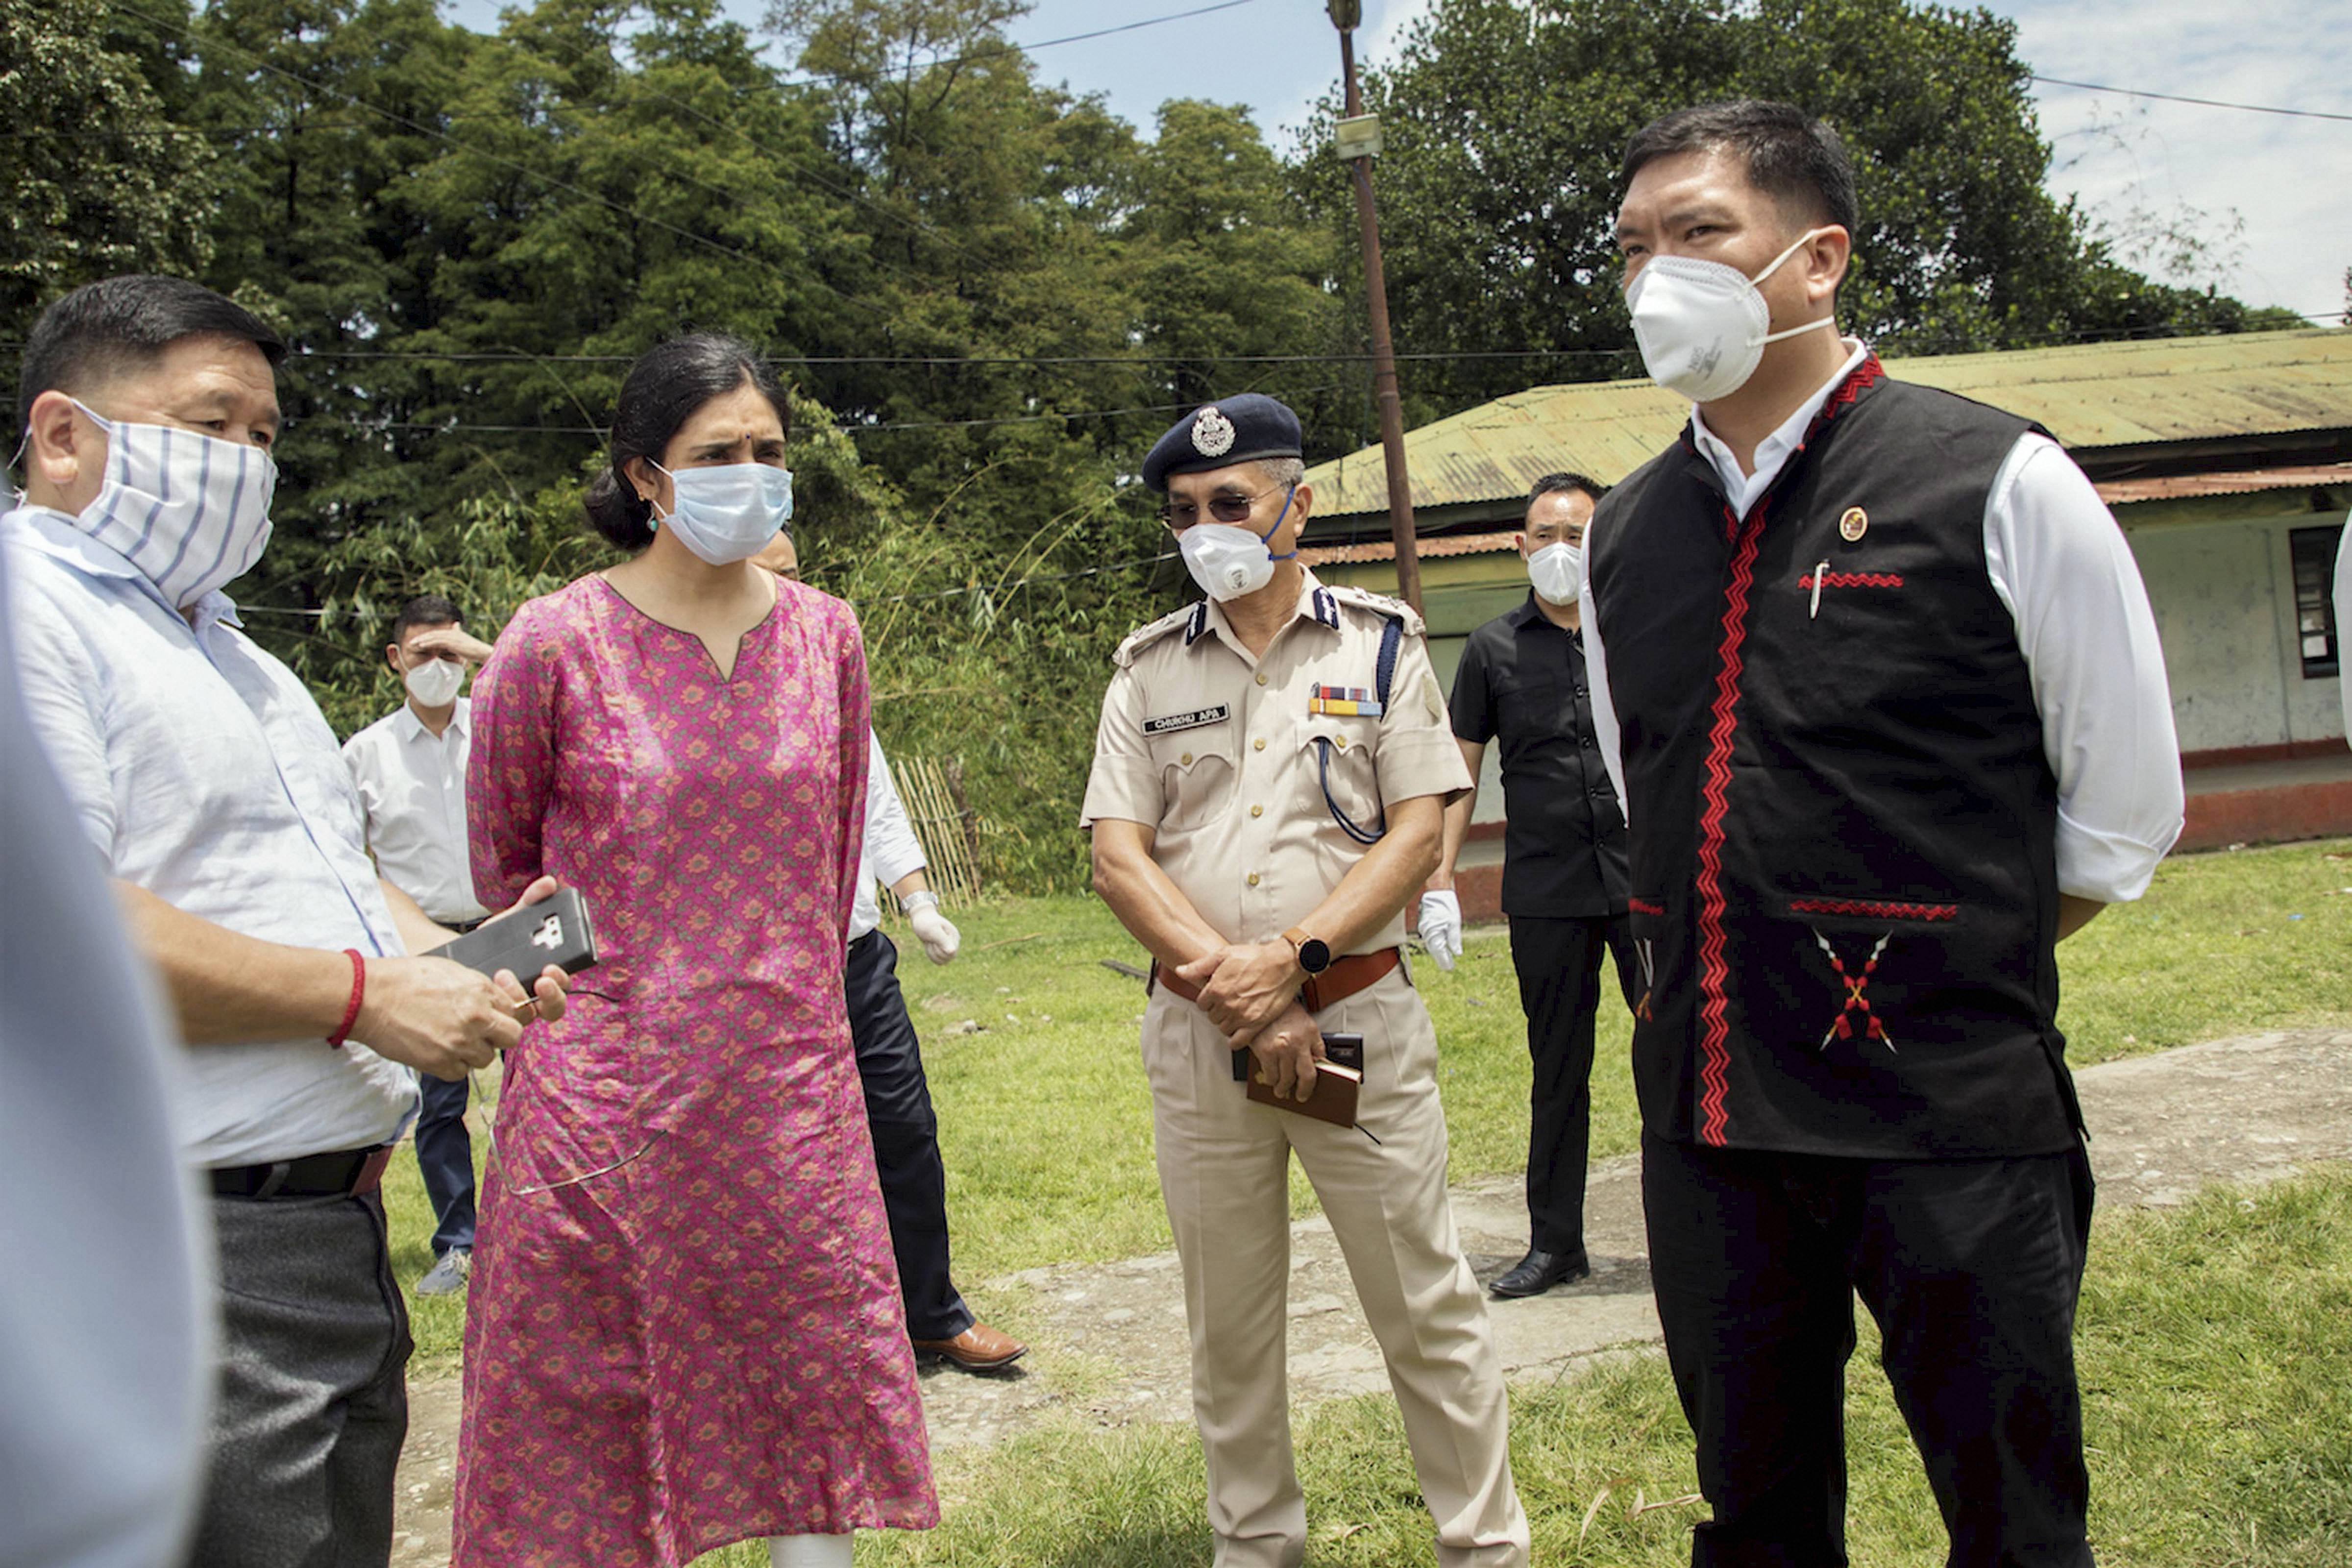 Arunachal Pradesh Chief Minister Pema Khandu interacts with officials during an inspection of a quarantine facility for COVID-19 patients, at Police Training Centre in Banderdewa, 30 km away from Itanagar, Tuesday, May 5, 2020.